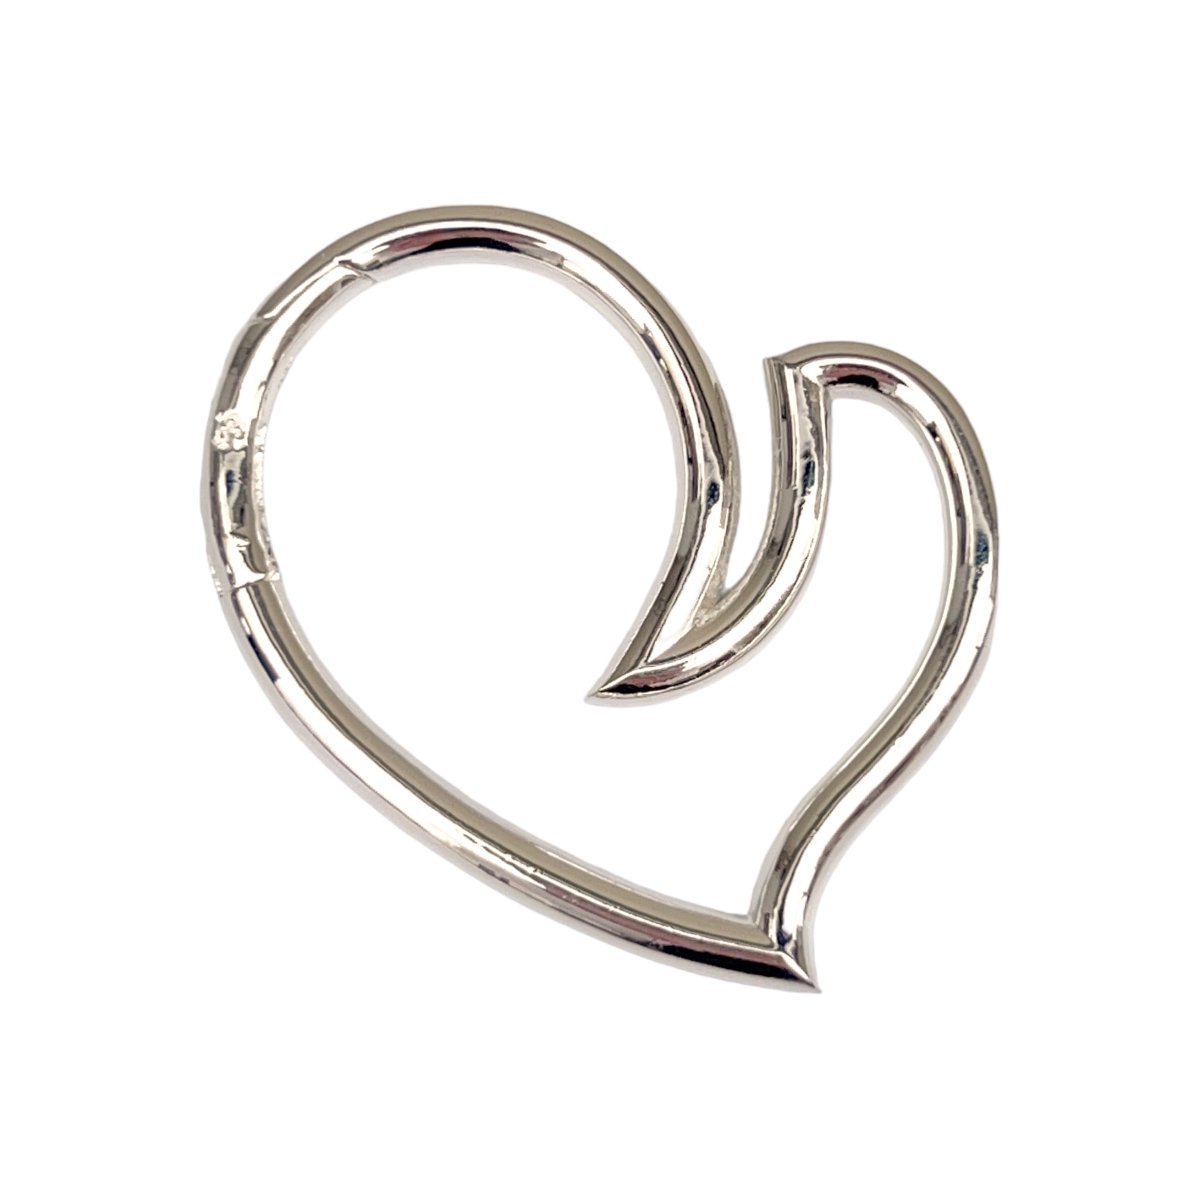 FIRSTRUST<BR>RINNE / LOVE KEYRING (RIGHT) | SILVER